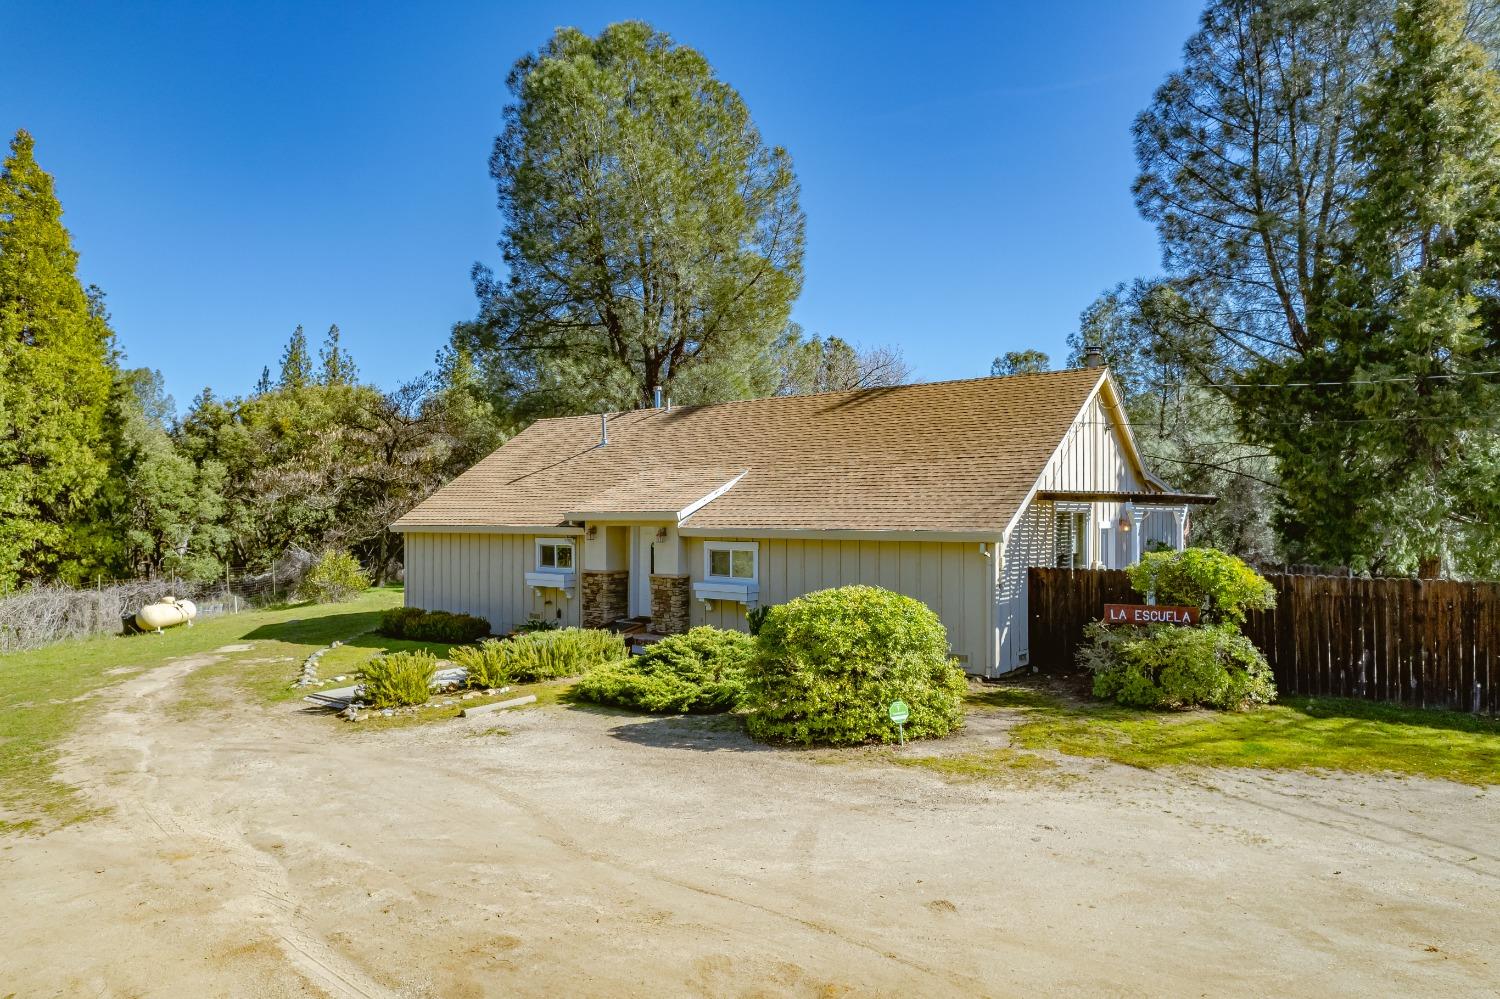 Photo of 8131 Fairplay Rd in Somerset, CA